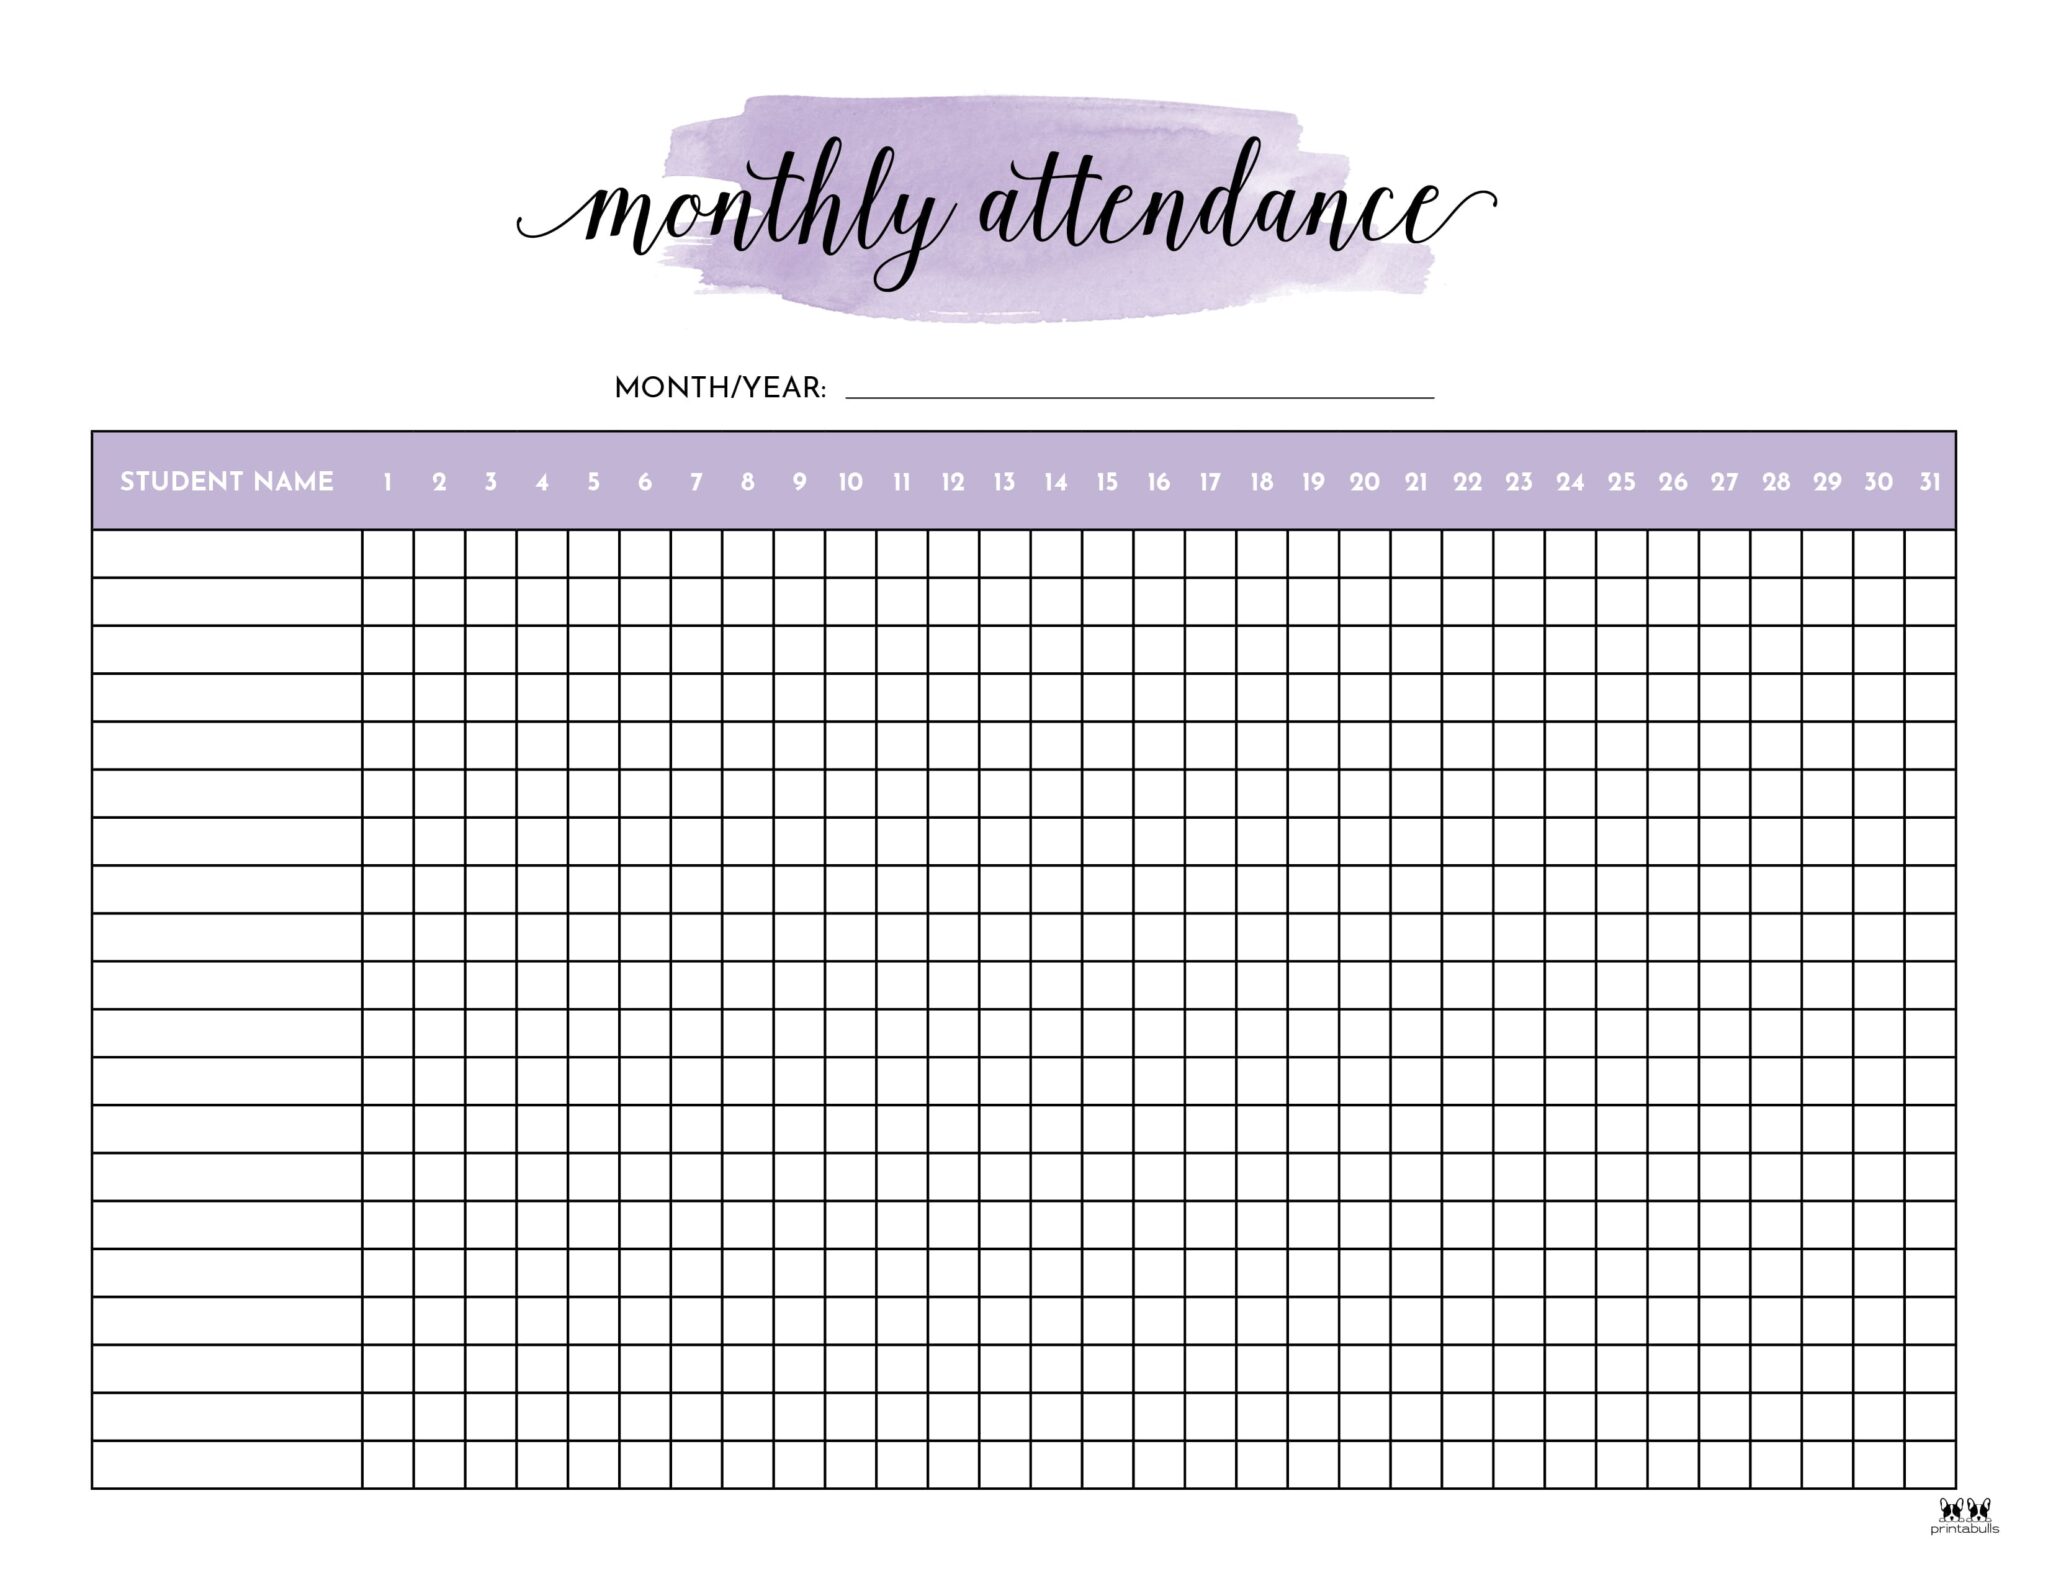 University month. Attendance Sheet. Table for attendance students.